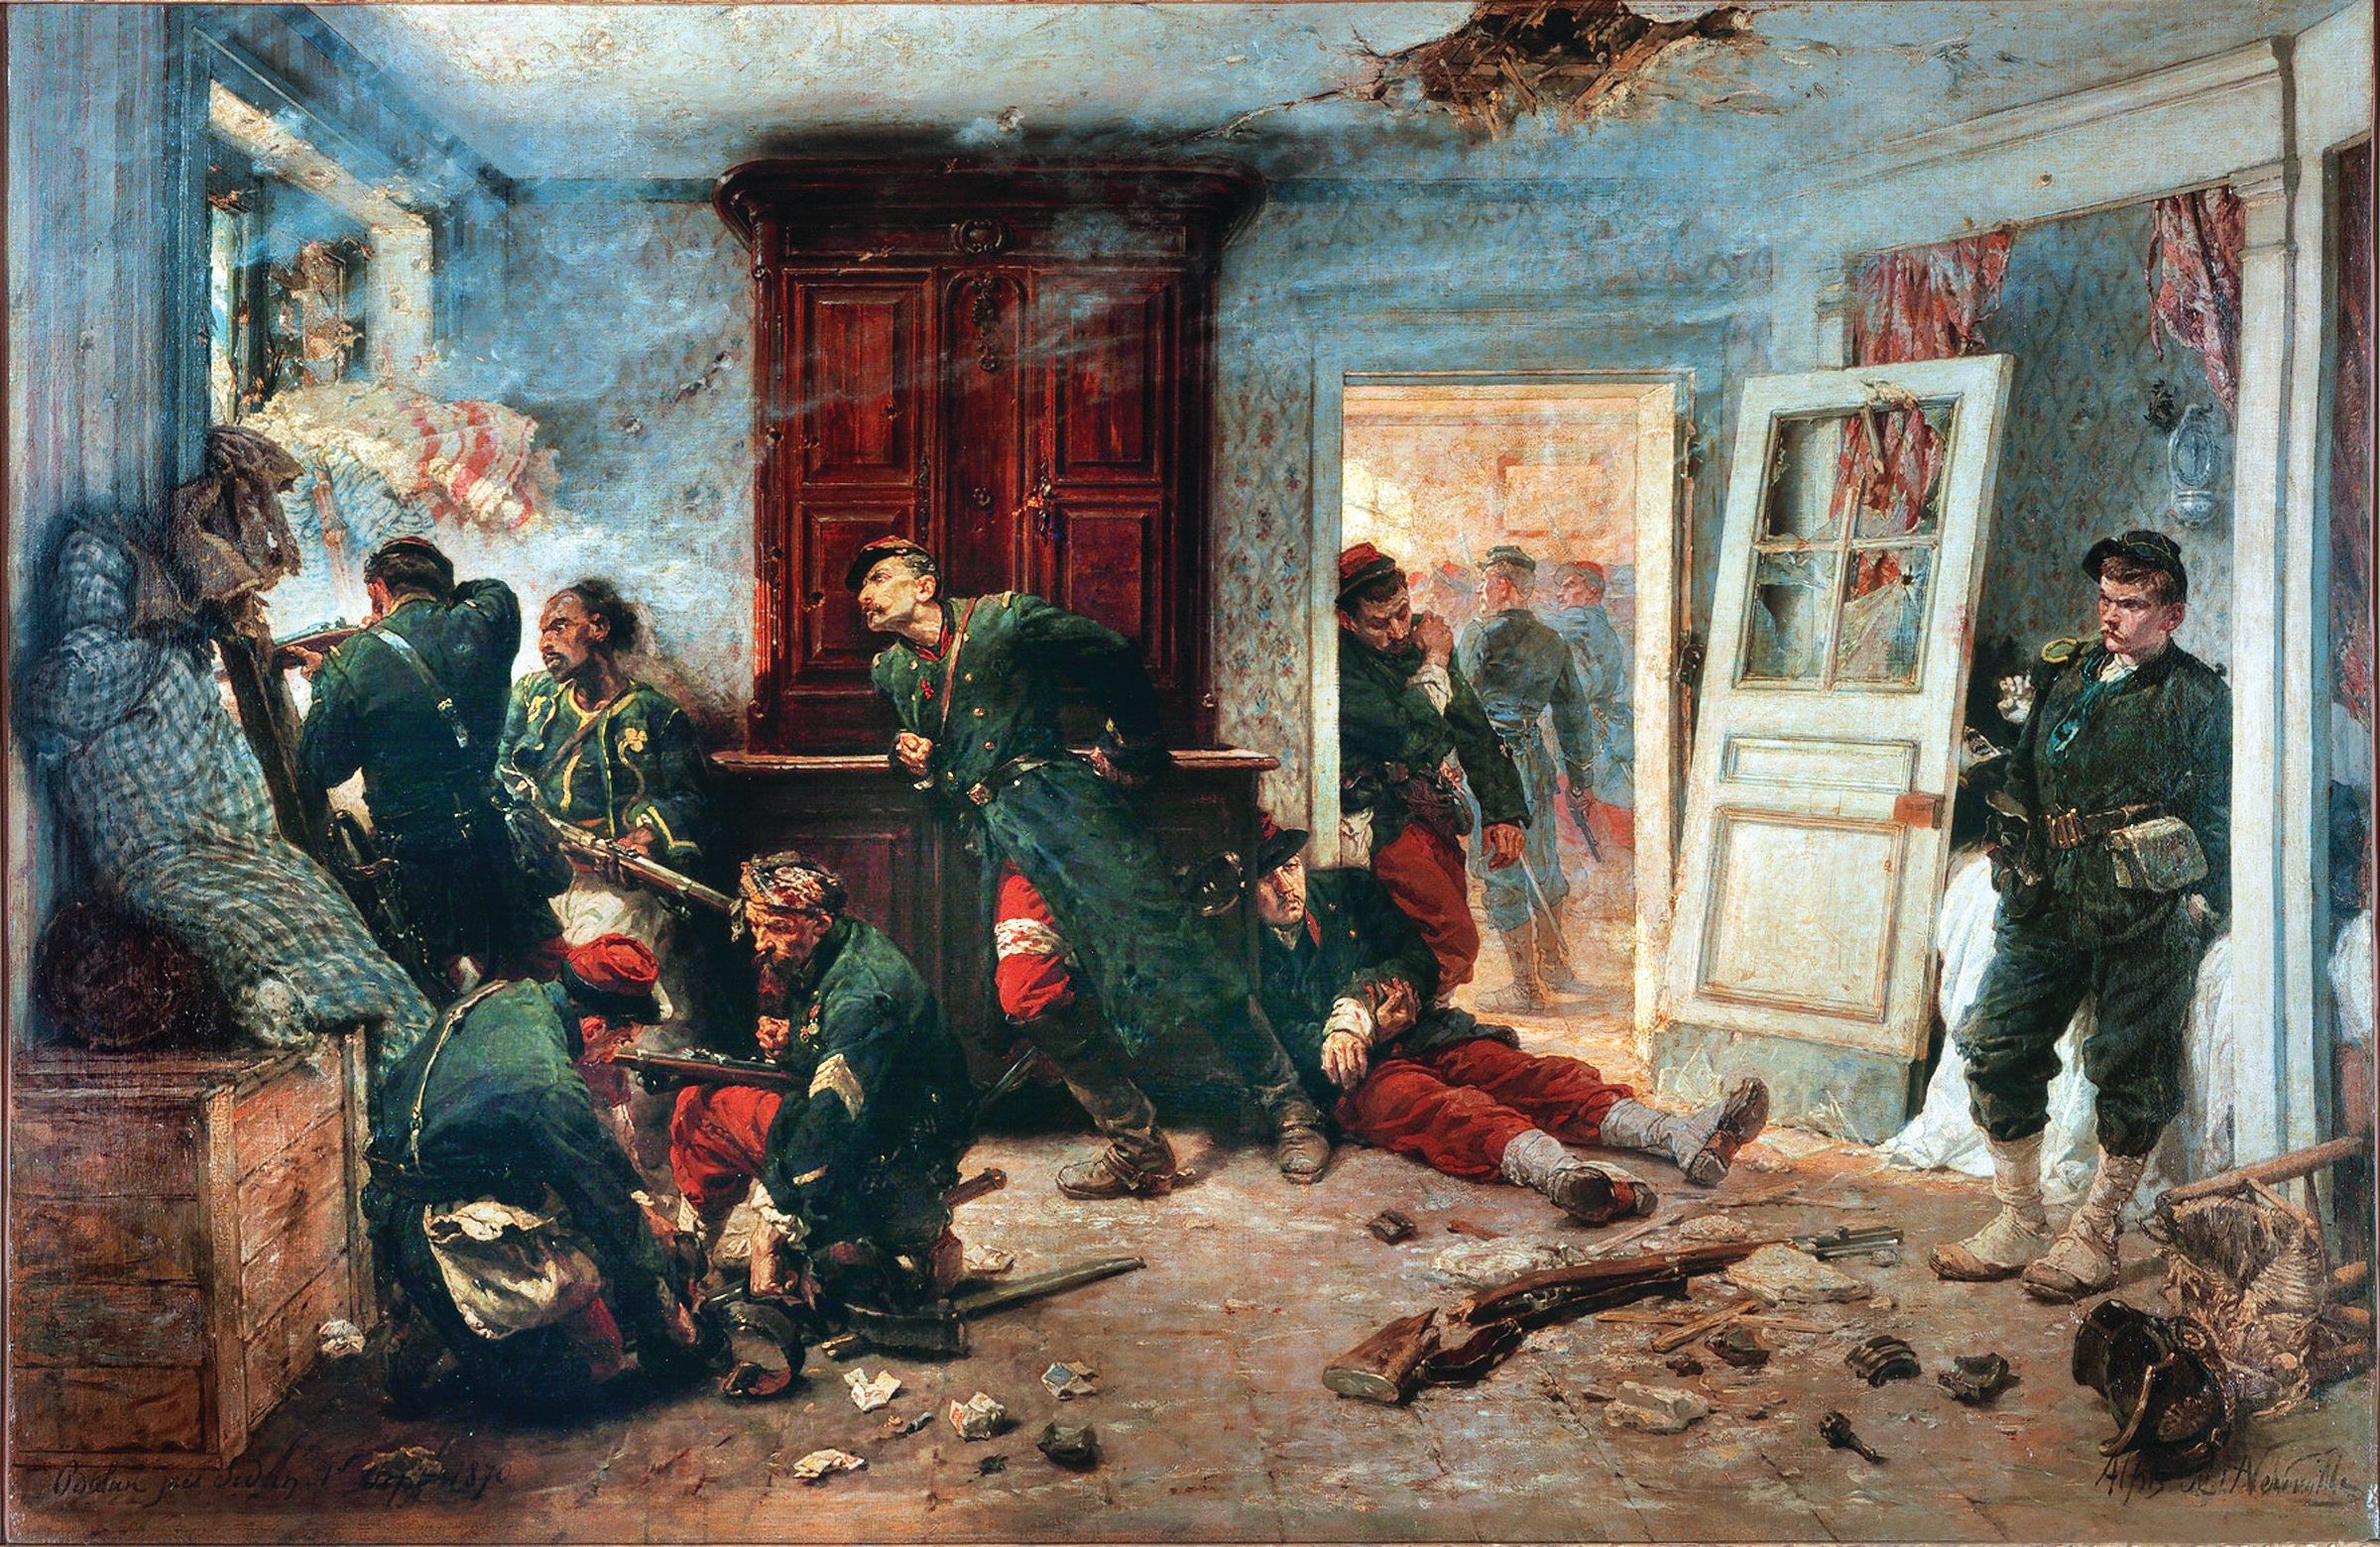 French marines holed up in the village of Bazeilles fire on Bavarian troops in a painting by Alphonse-Marie-Adolphe de Neuville titled “The Last Cartridges.” 